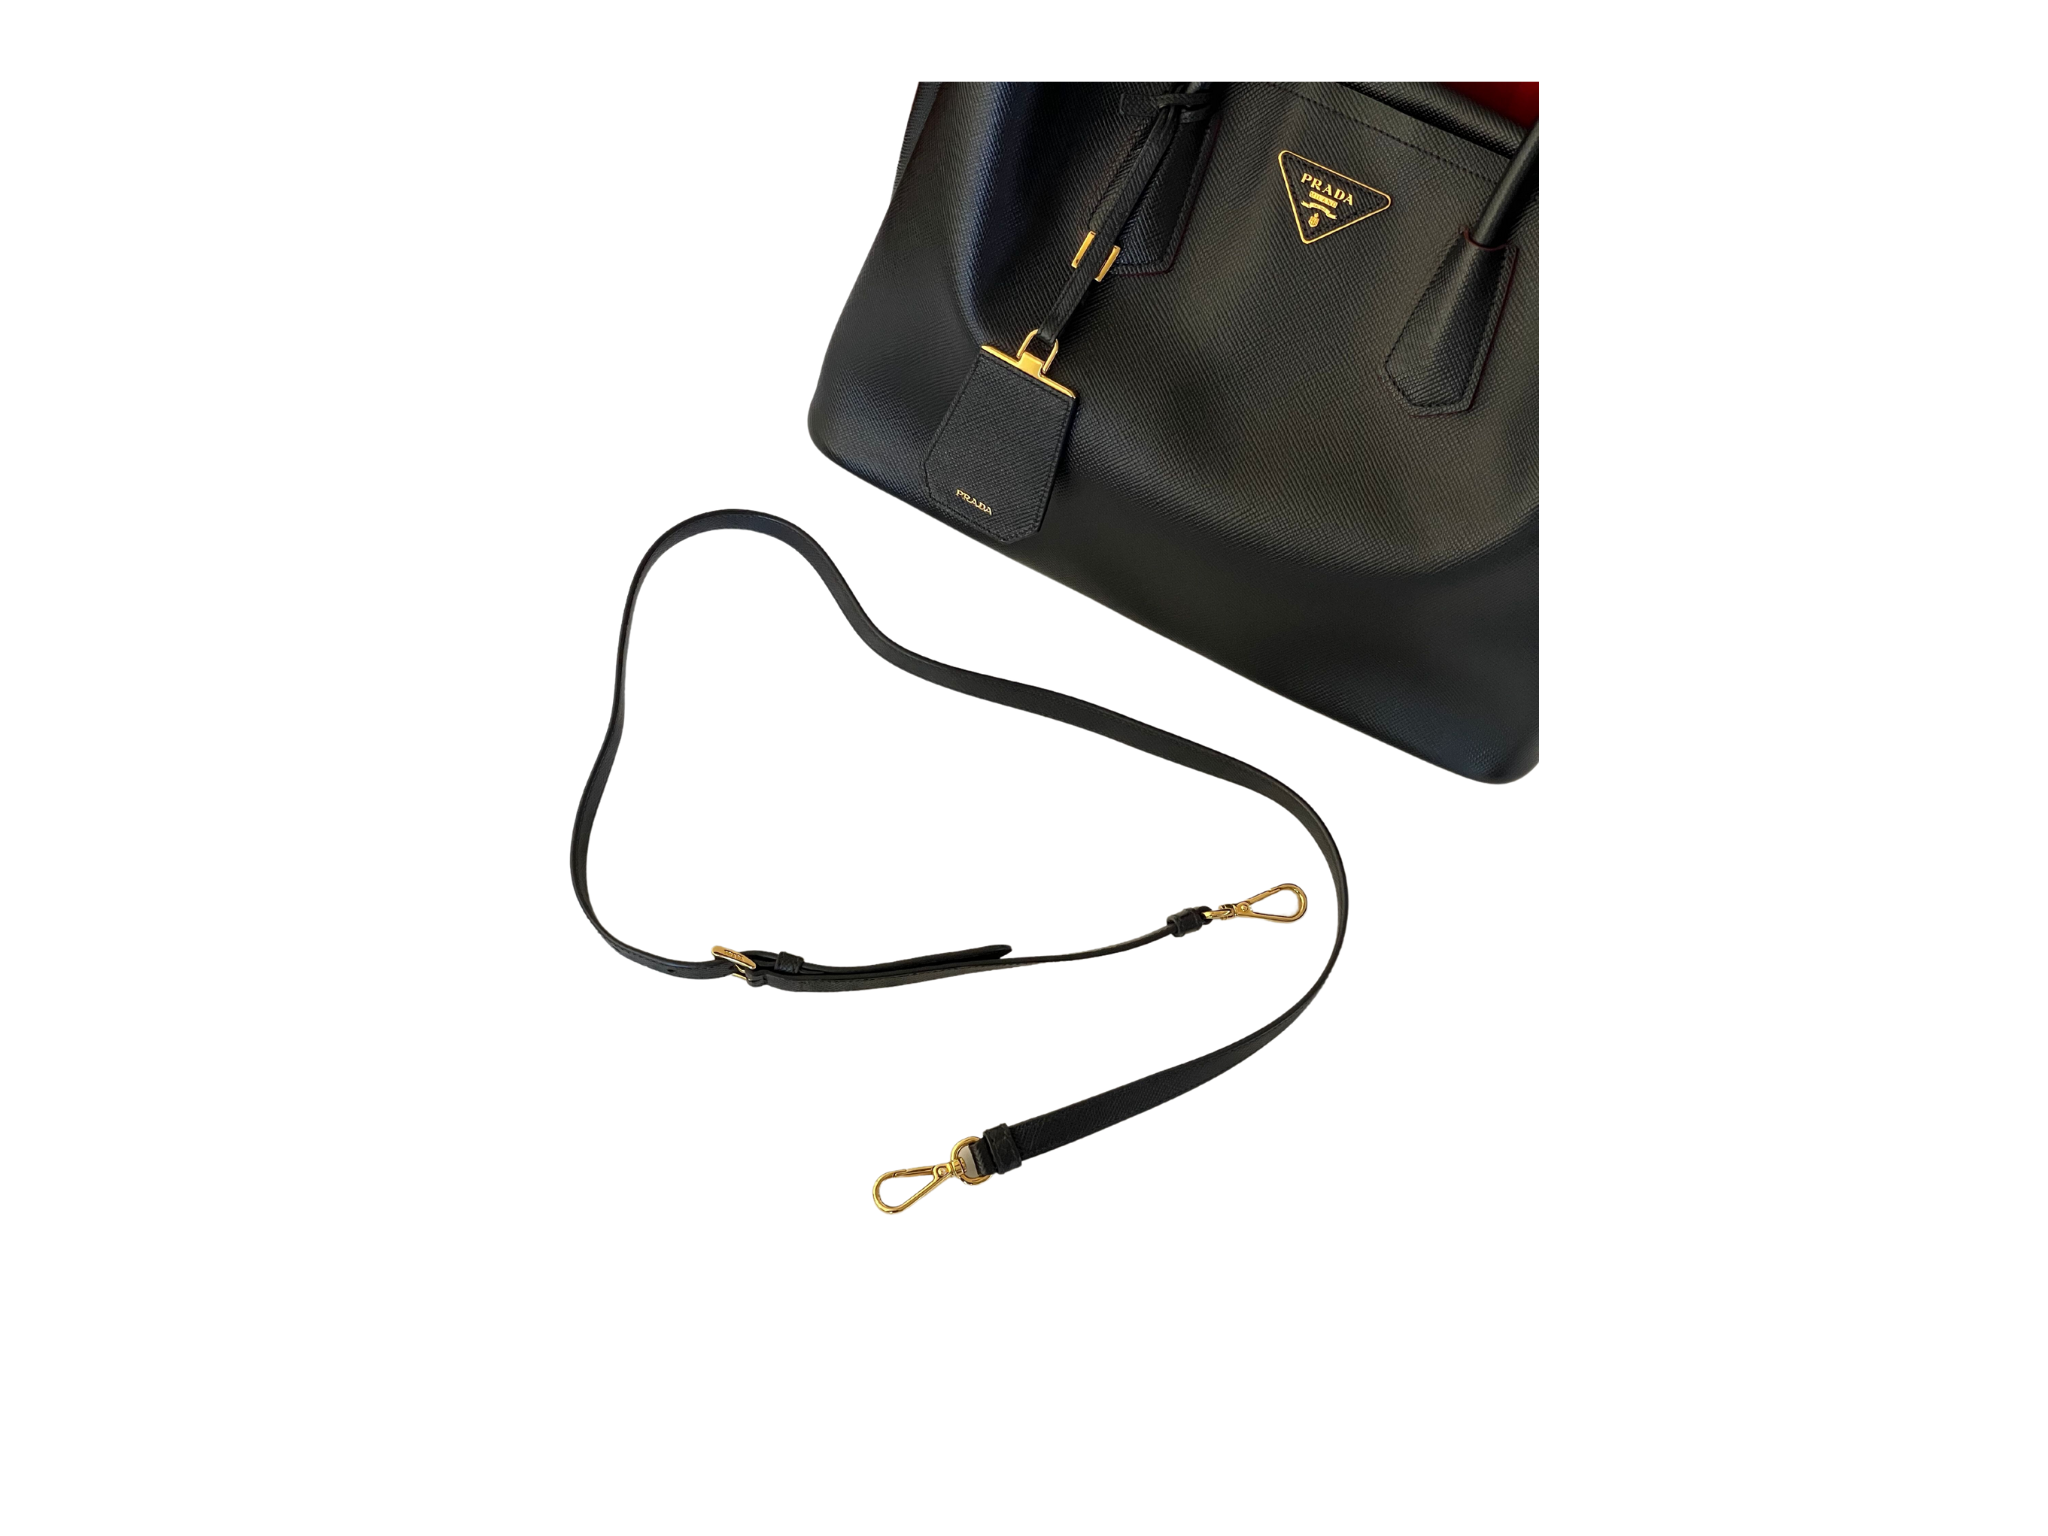 Prada Medium Saffiano Leather Double Bag – The Hunter and The Styled